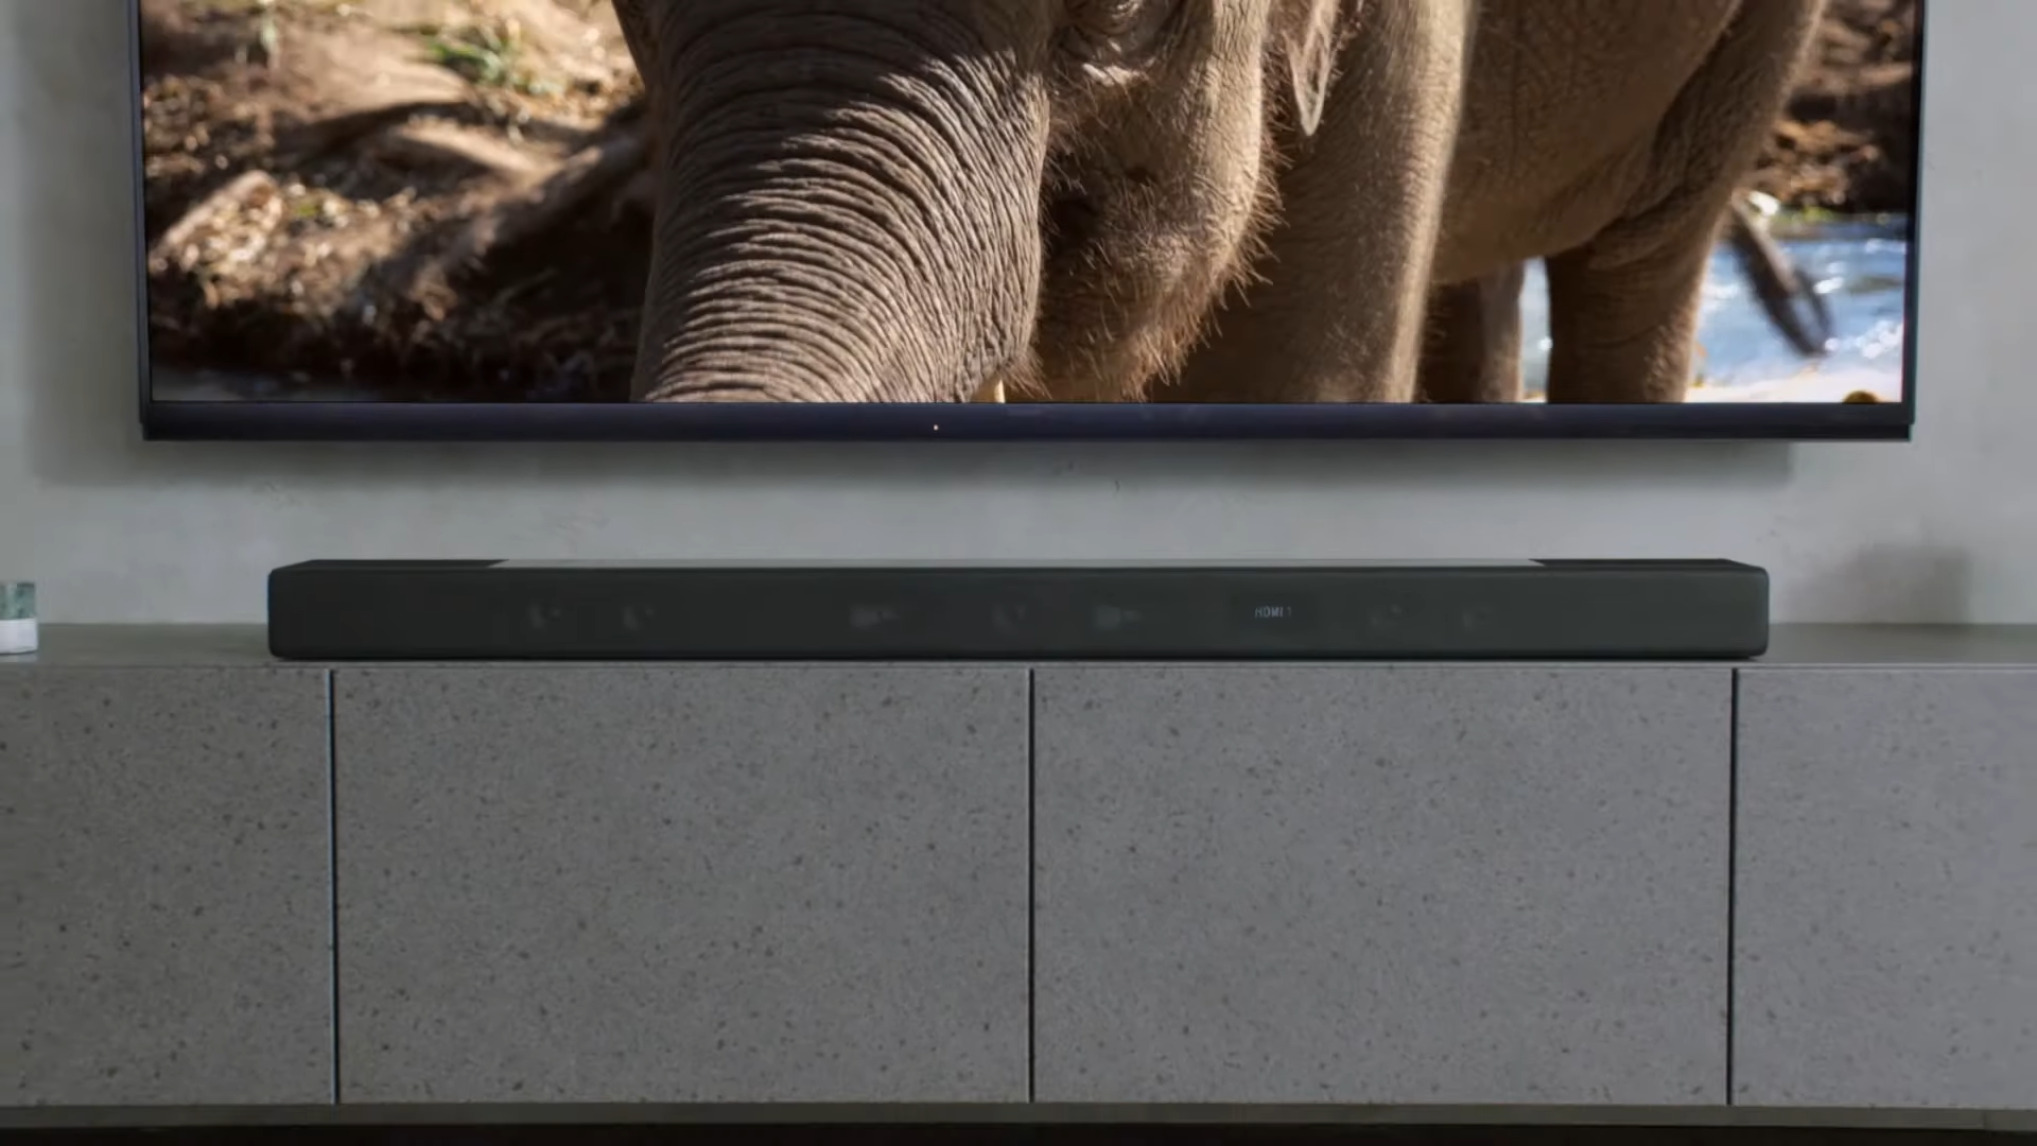 The Sony HT-A7000 is one of the best soundbars of 2022